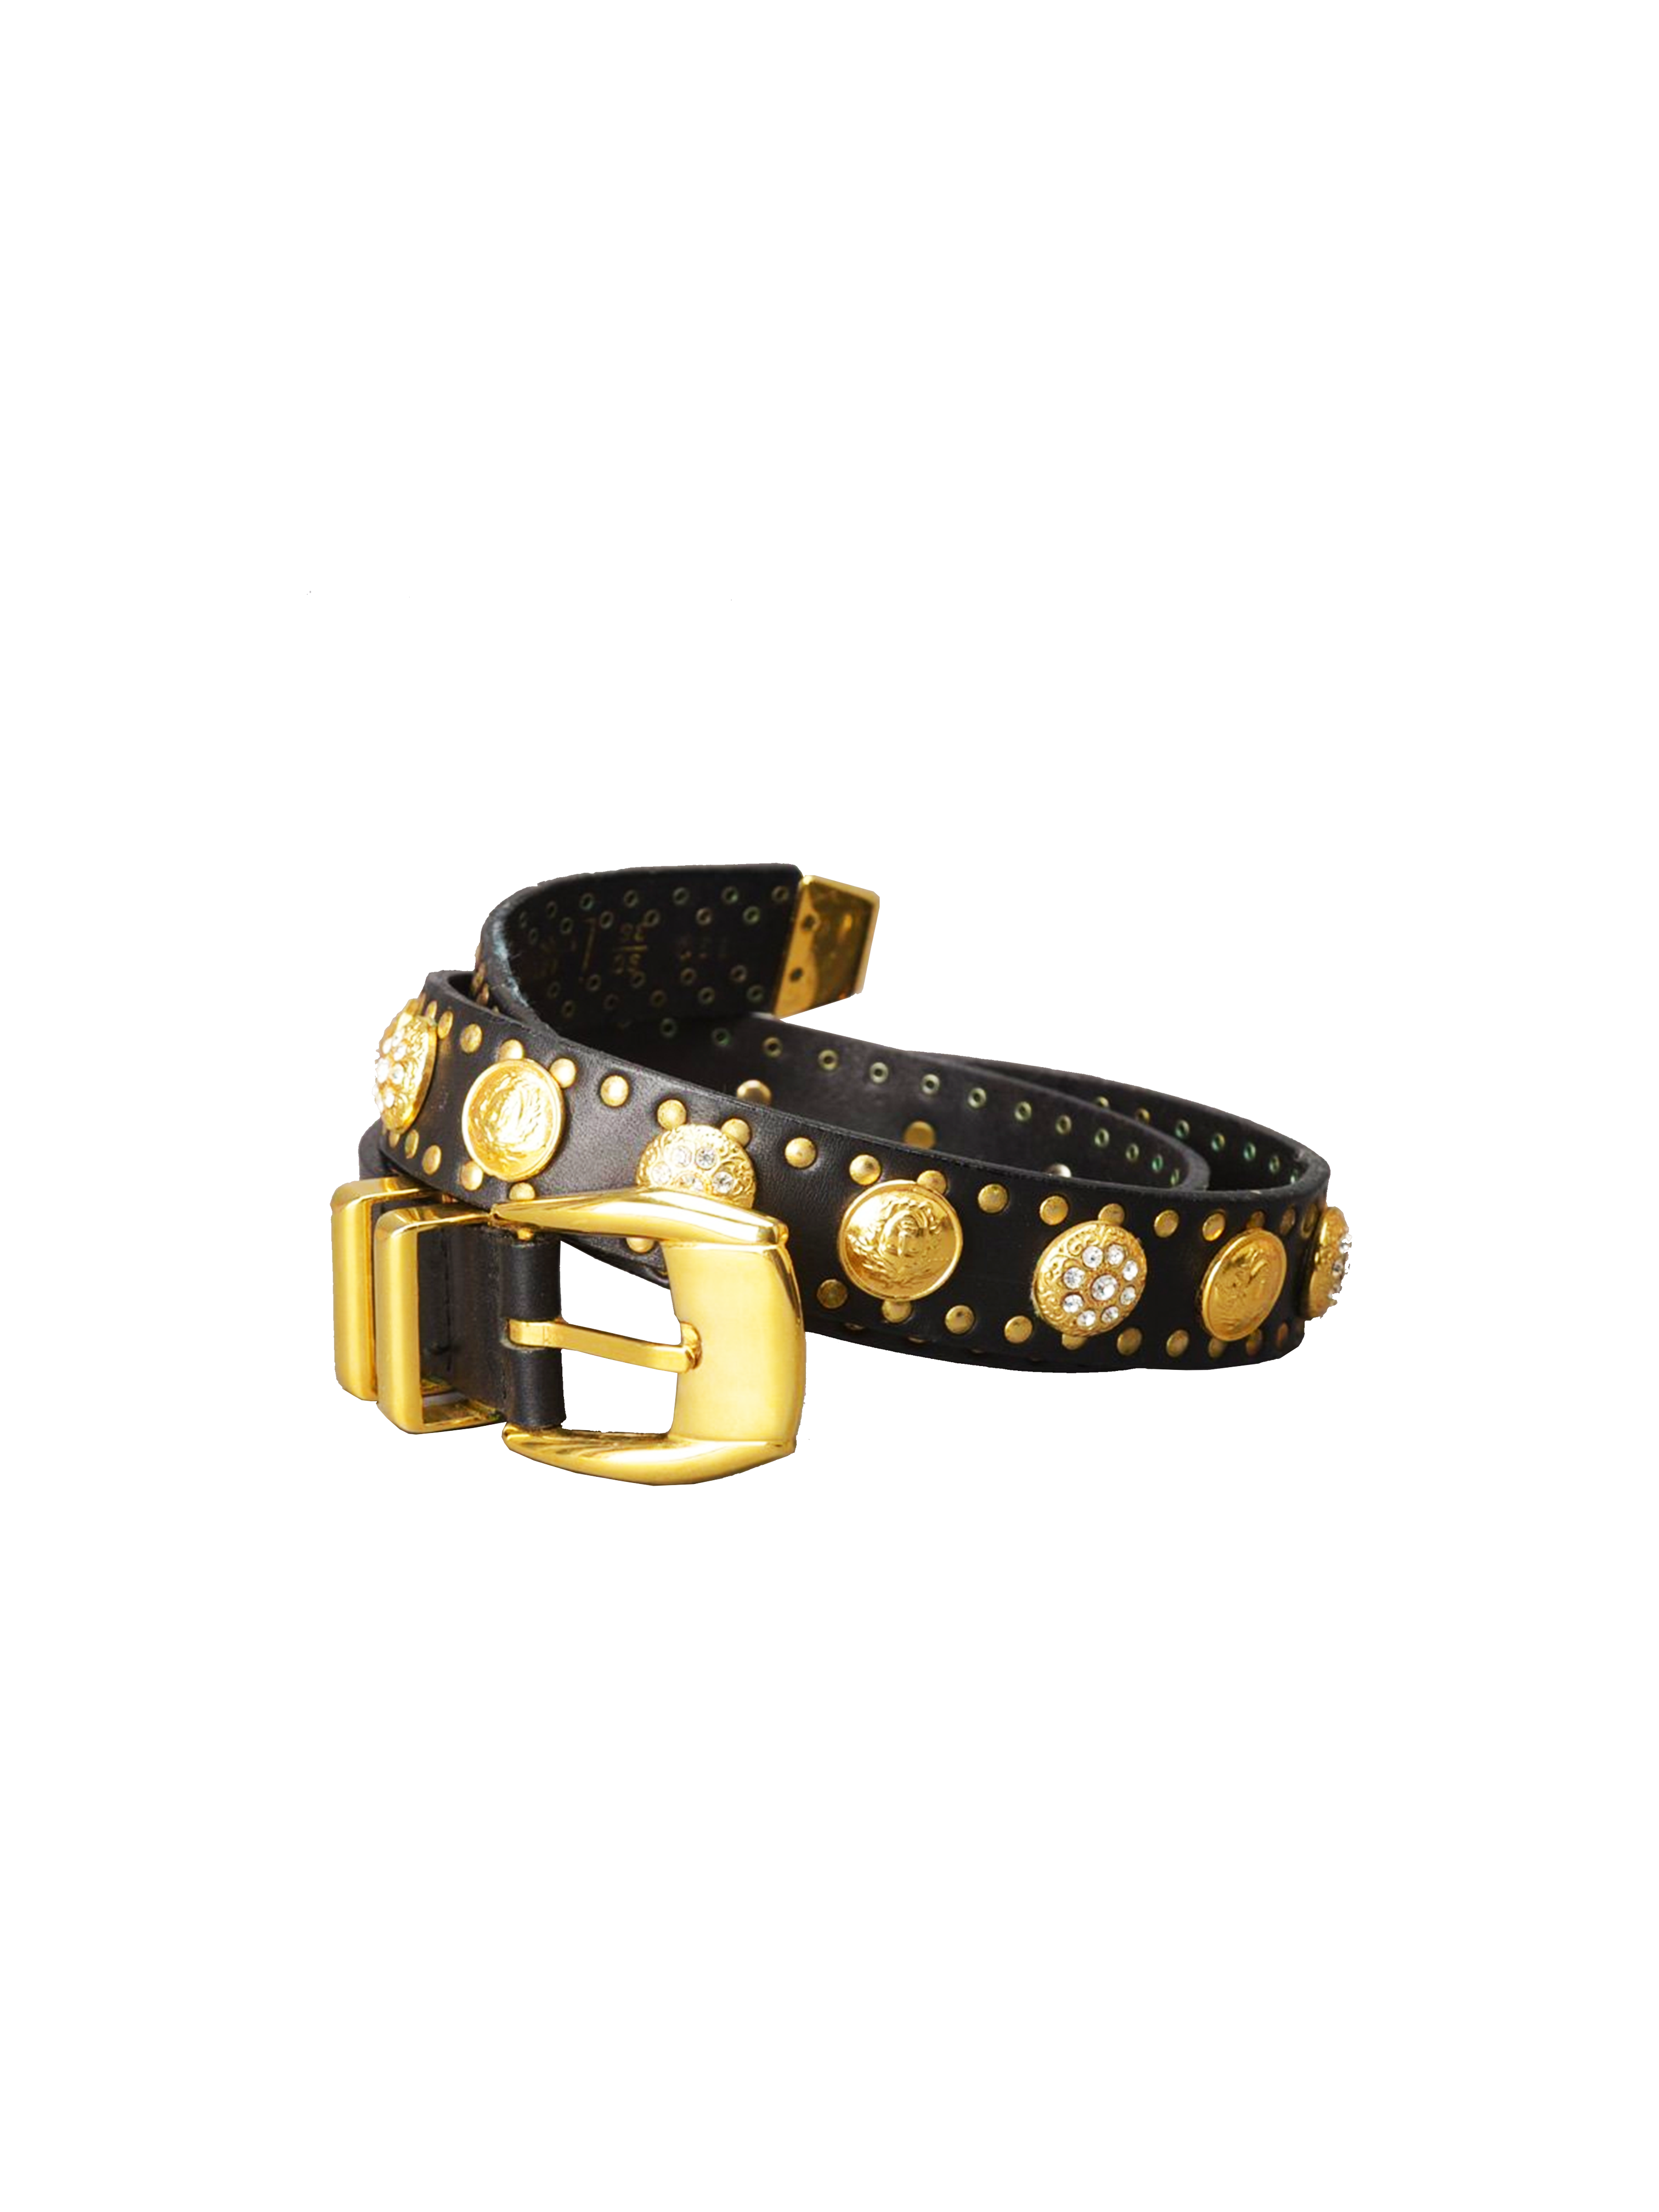 Versace Black/Gold Square Medusa Belt - Accessories from